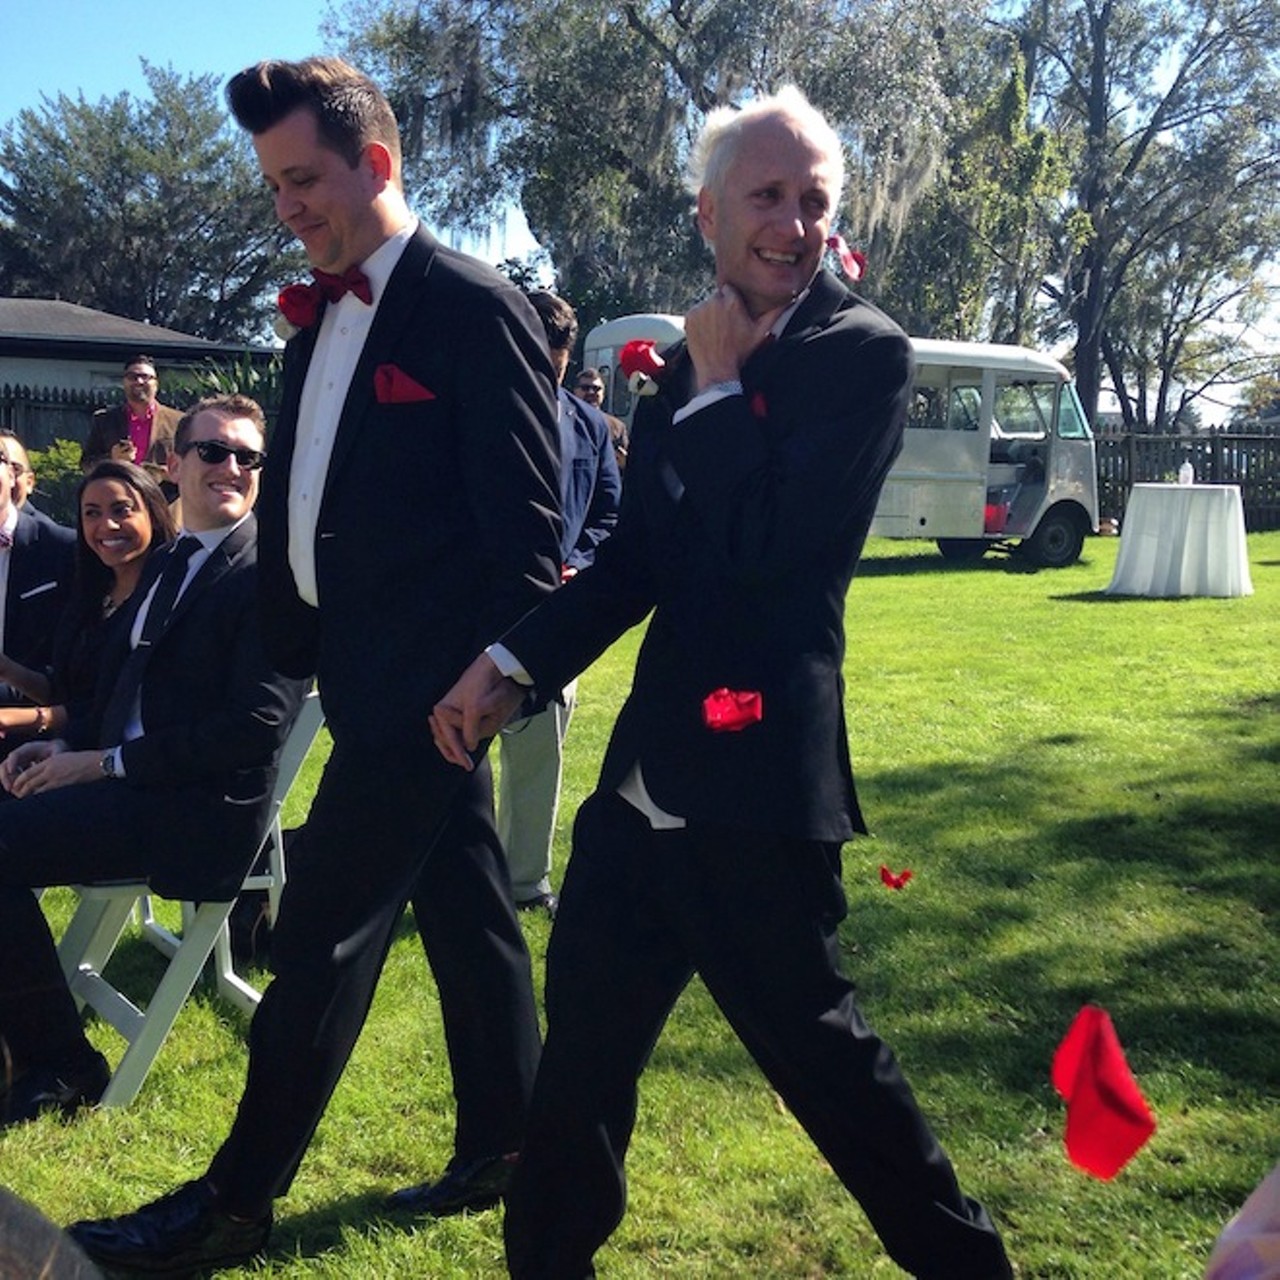 Billy Manes on his way down the aisle with now-hubby Tony Mauss